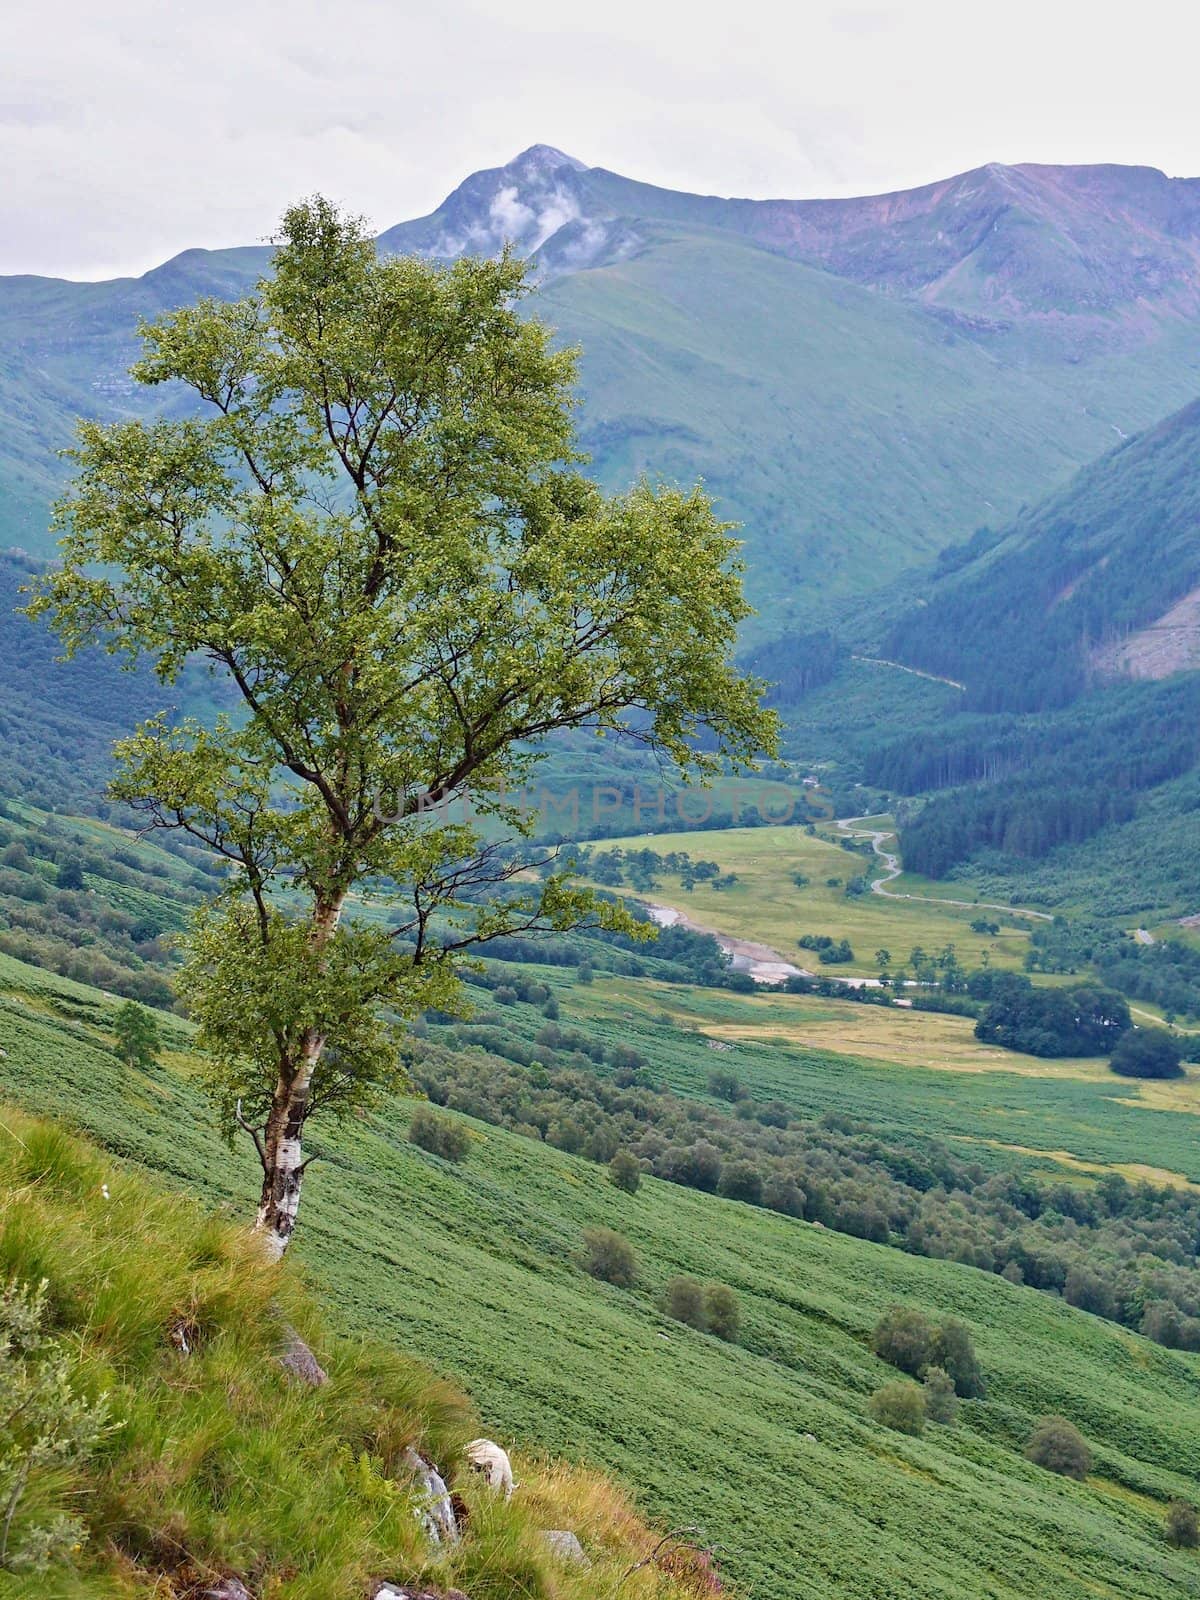 Trail  on Ben Nevis in the Scotland highlands         by jnerad